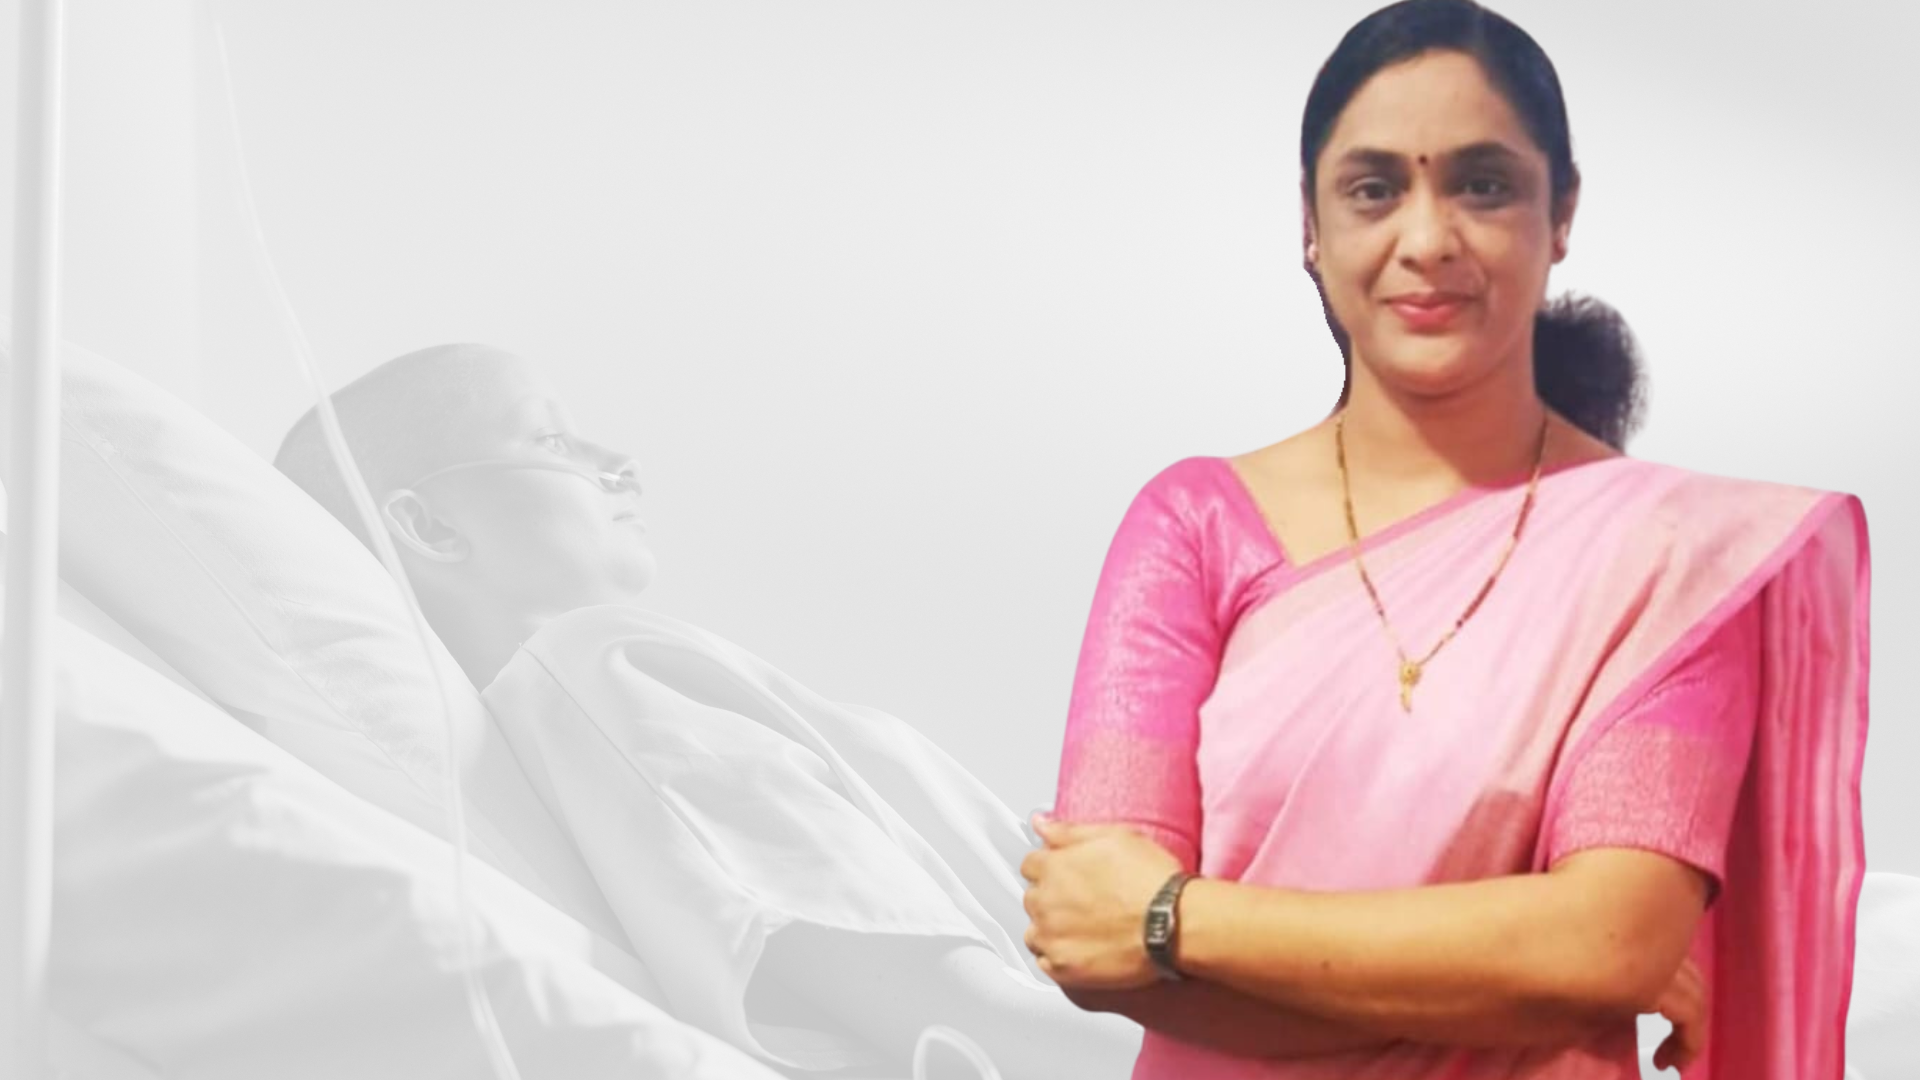 I Want To Empower Women Through Knowledge Gained From My Experience: Jayashree Mahesh More On Breast Cancer